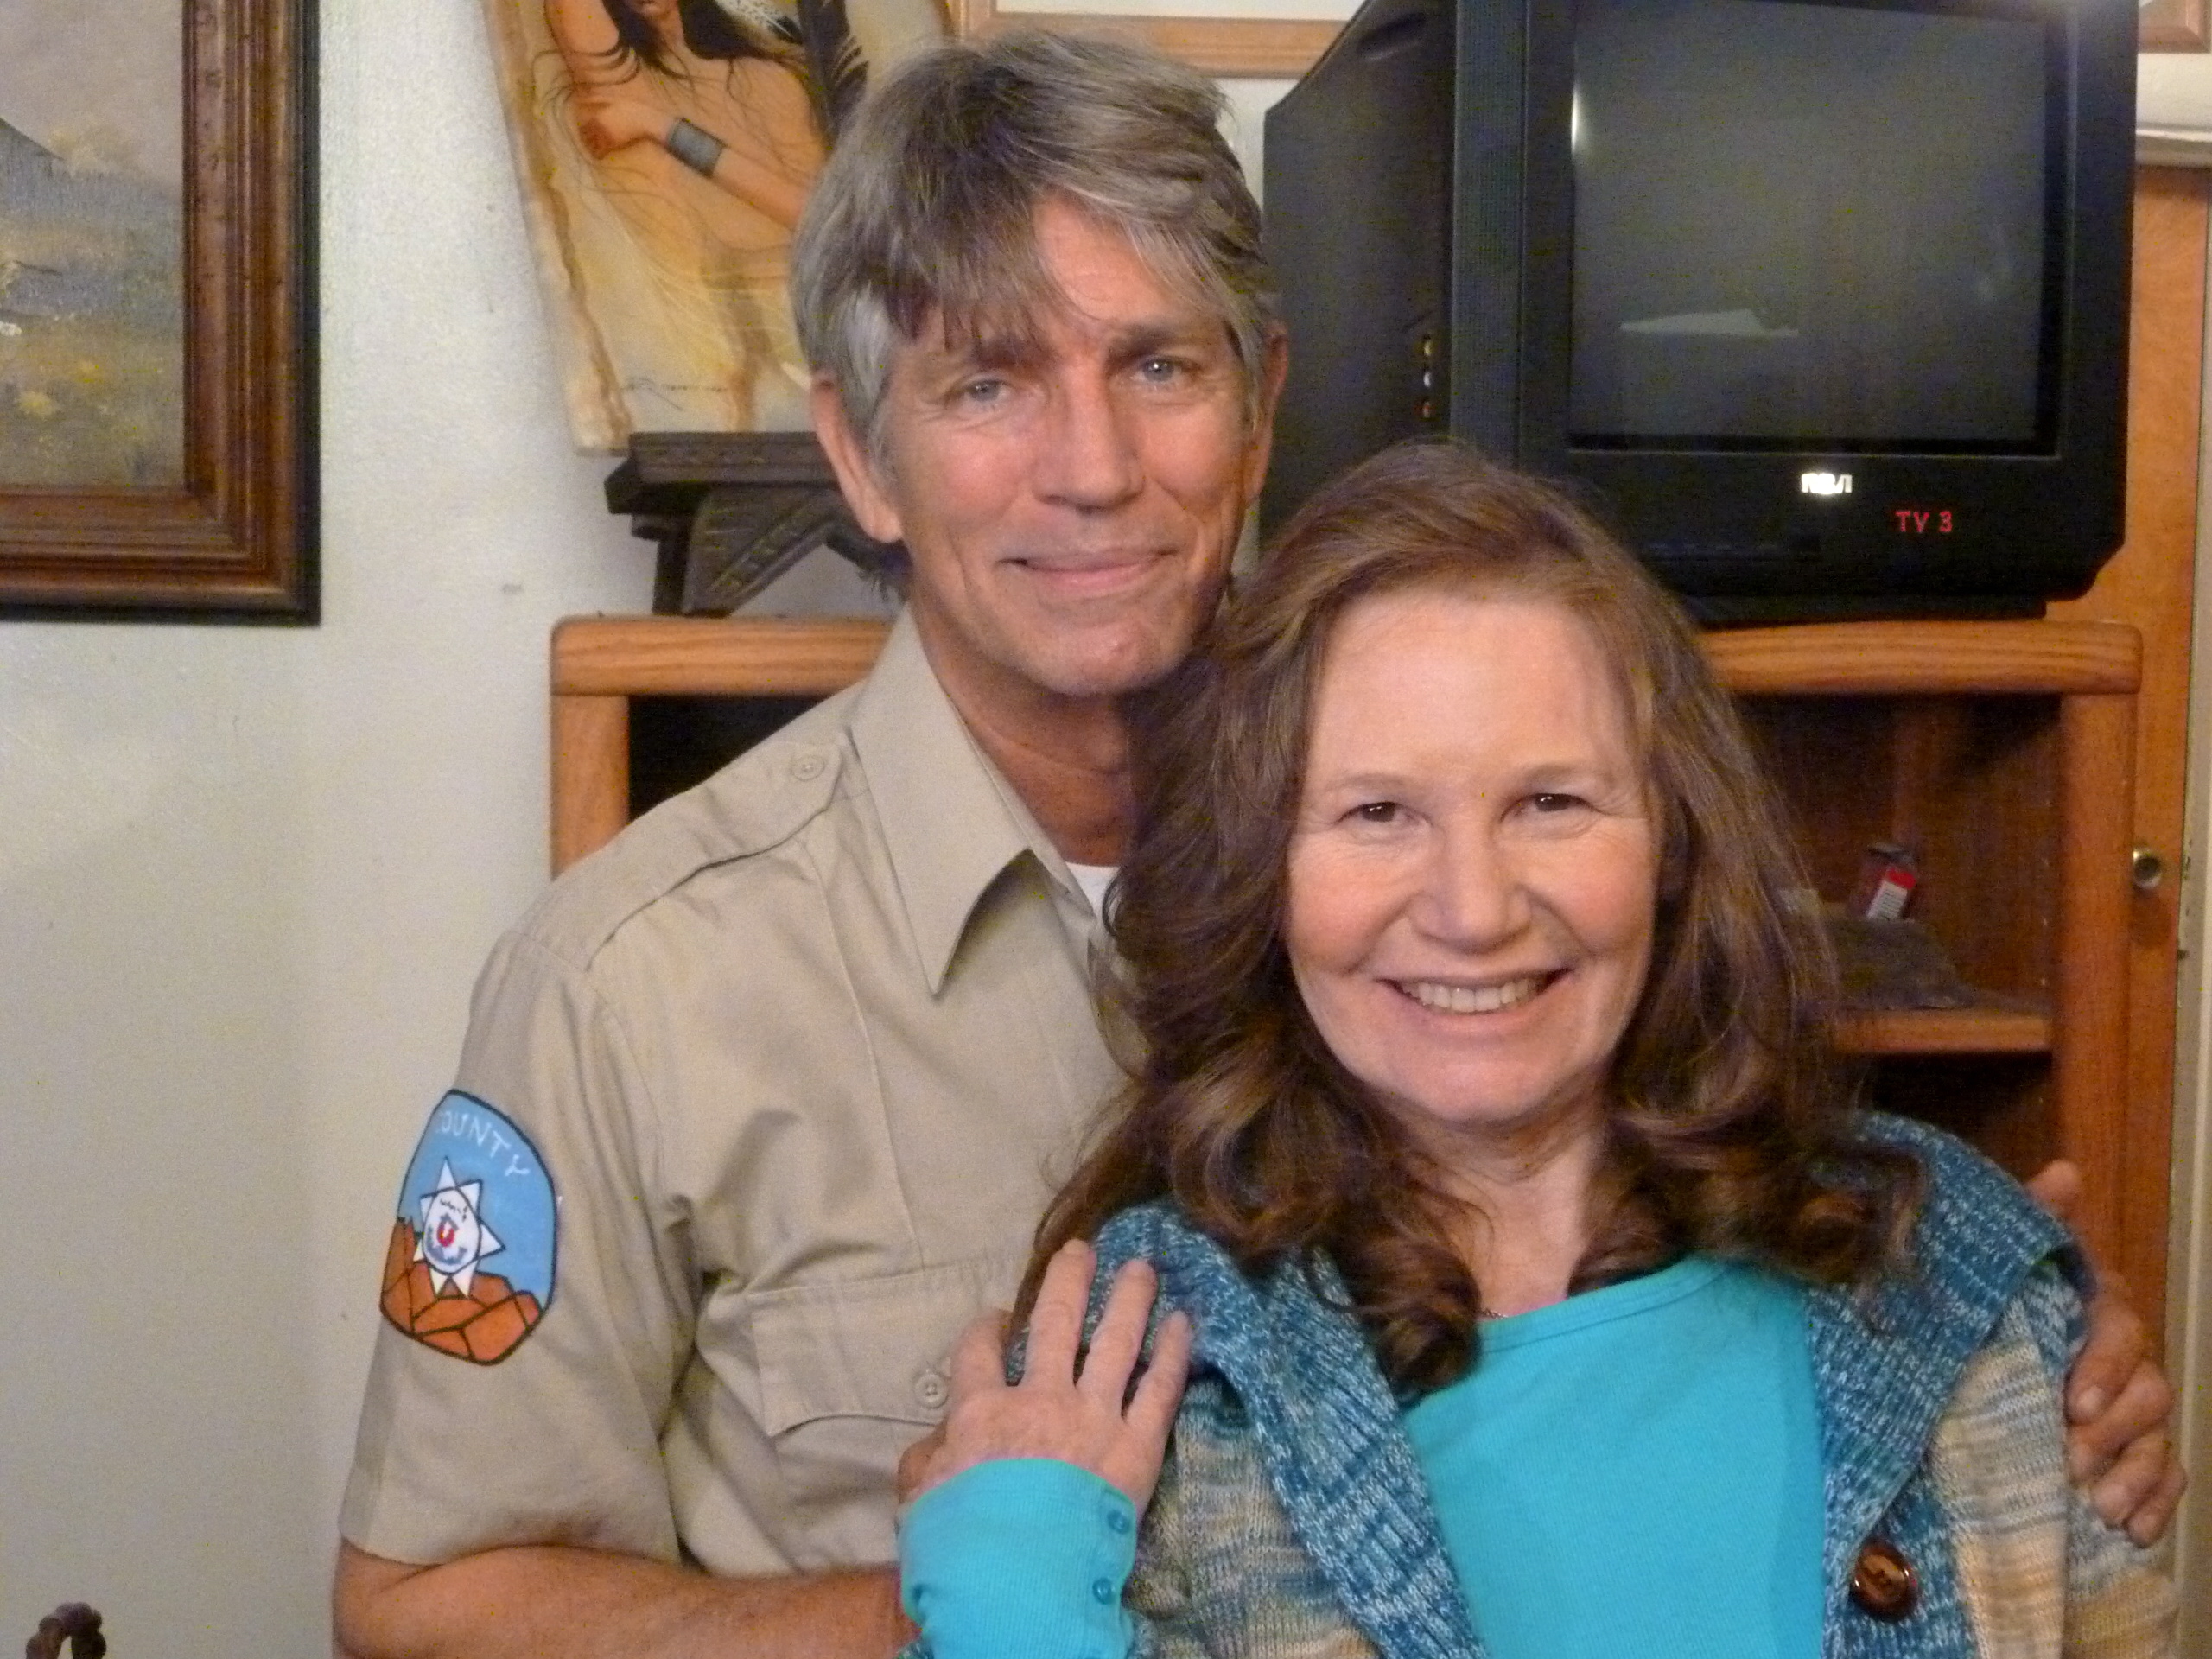 Eric Roberts as Sheriff Jensen, Roberta Bassin as his sister Kathy Jensen during filming of feature